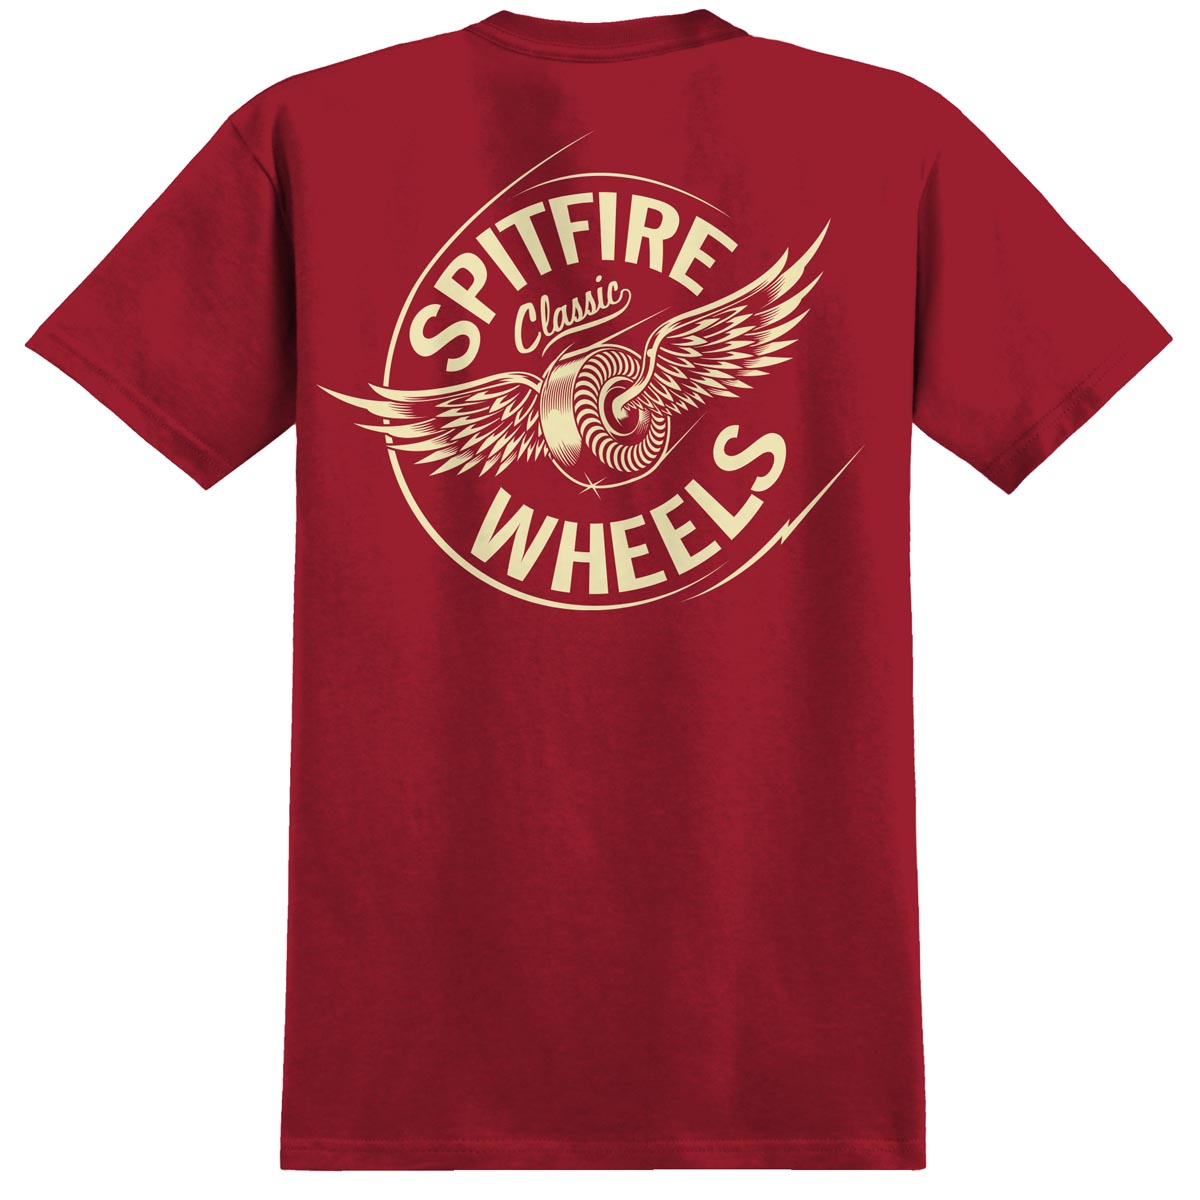 Spitfire Flying Classic T-Shirt - Maroon image 1